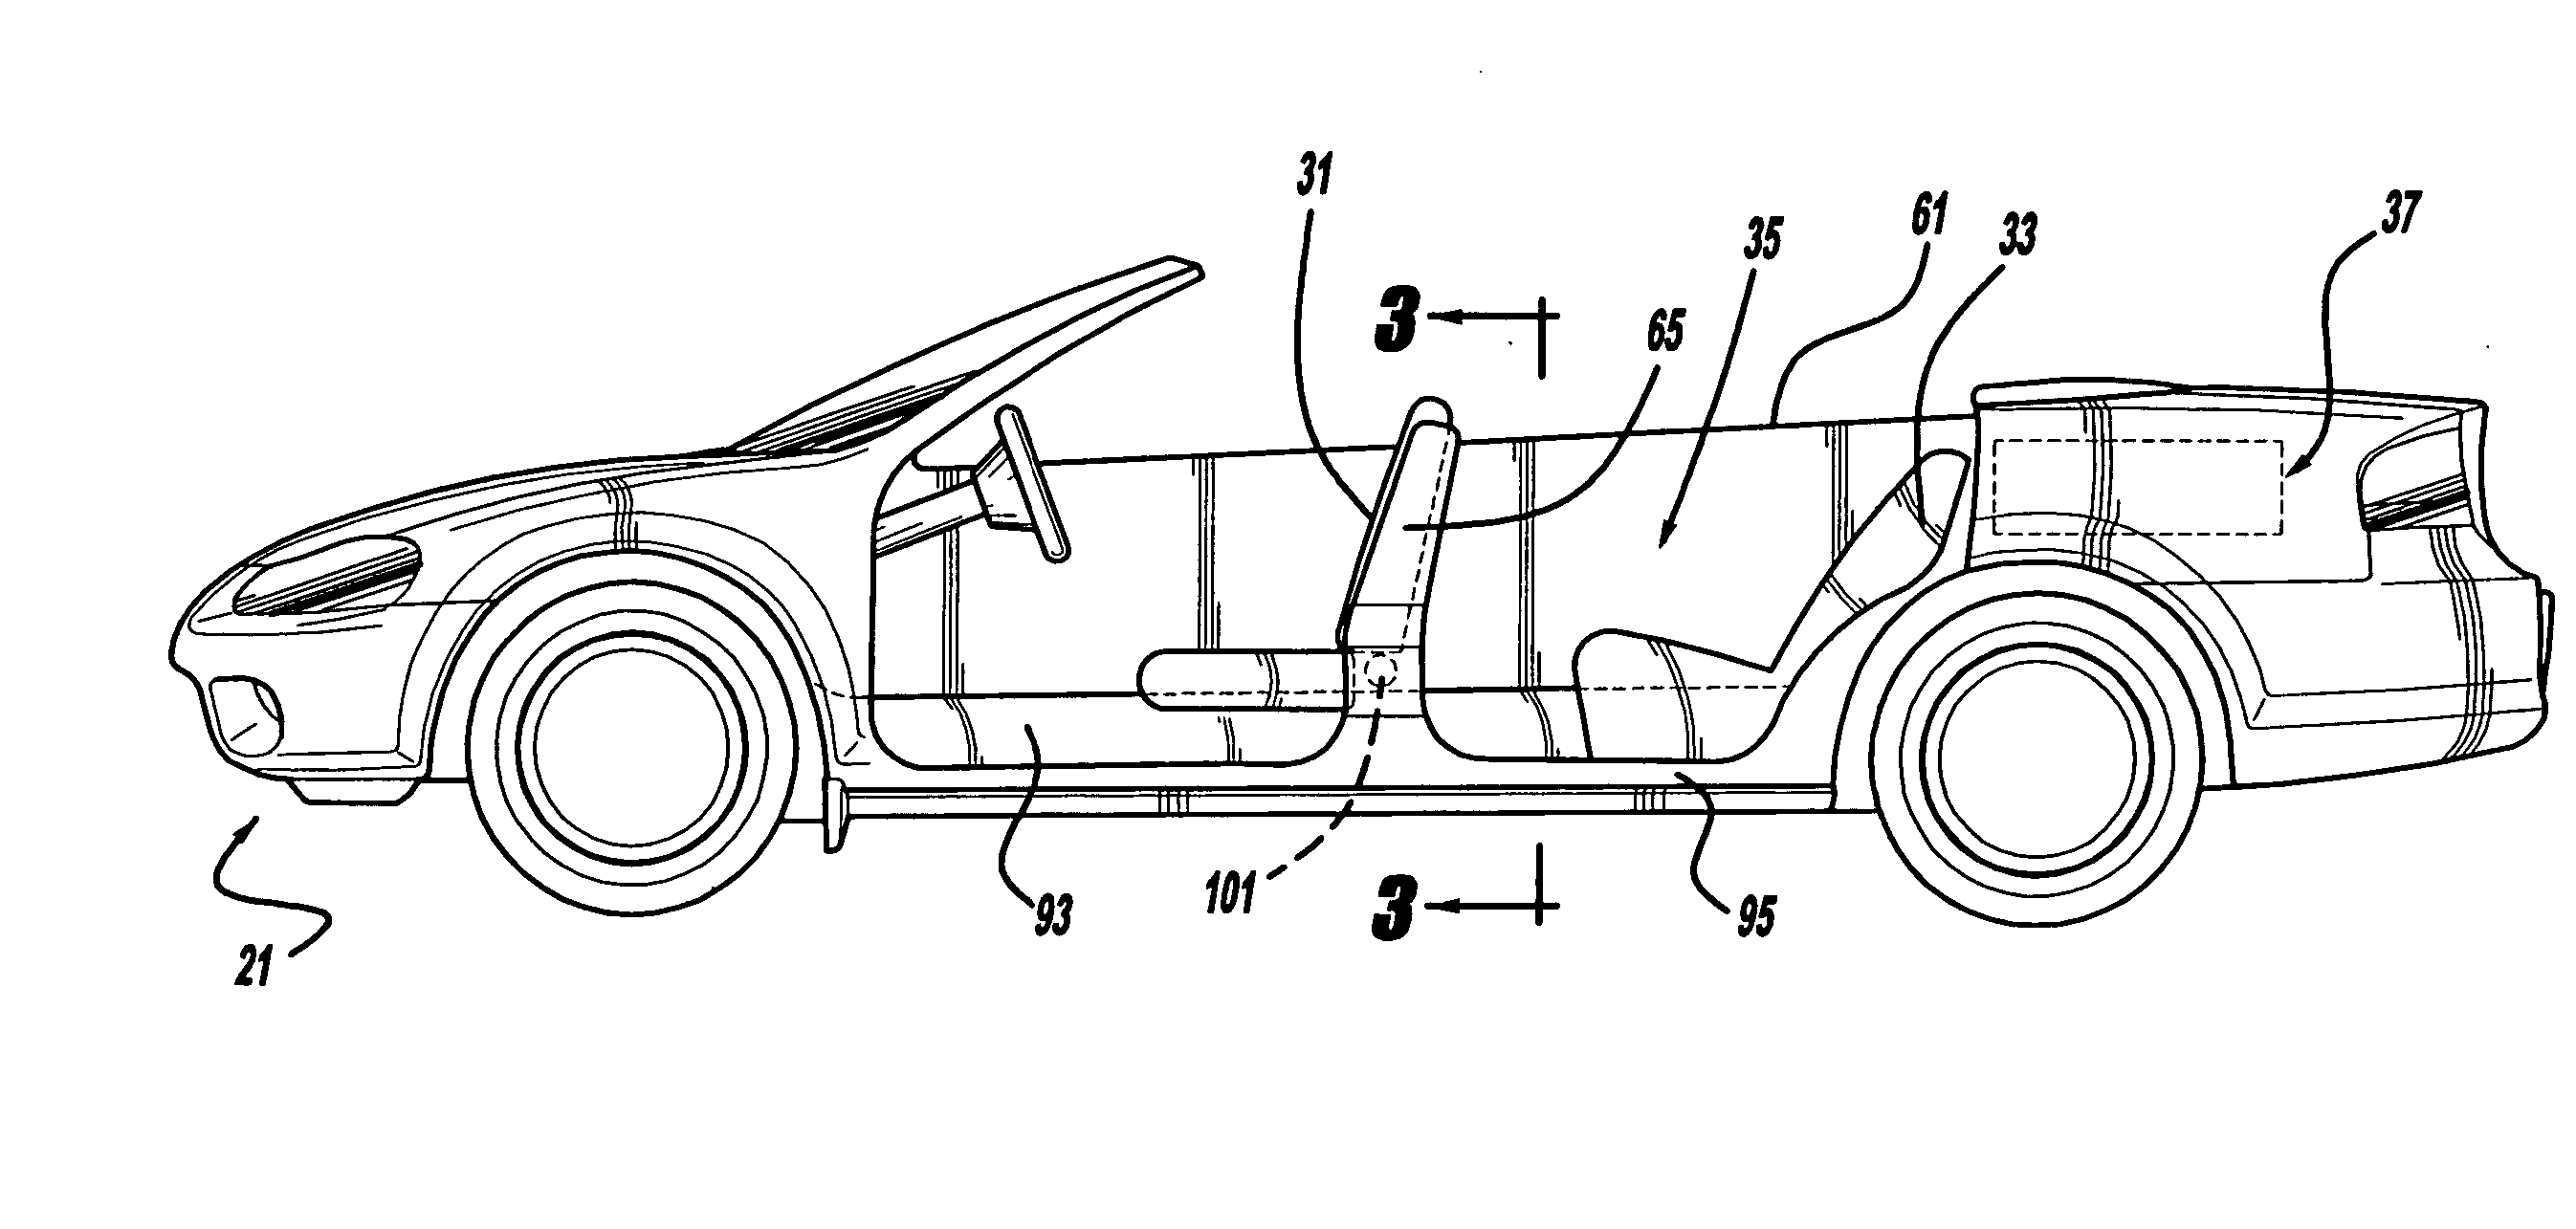 Structural seat system for an automotive vehicle